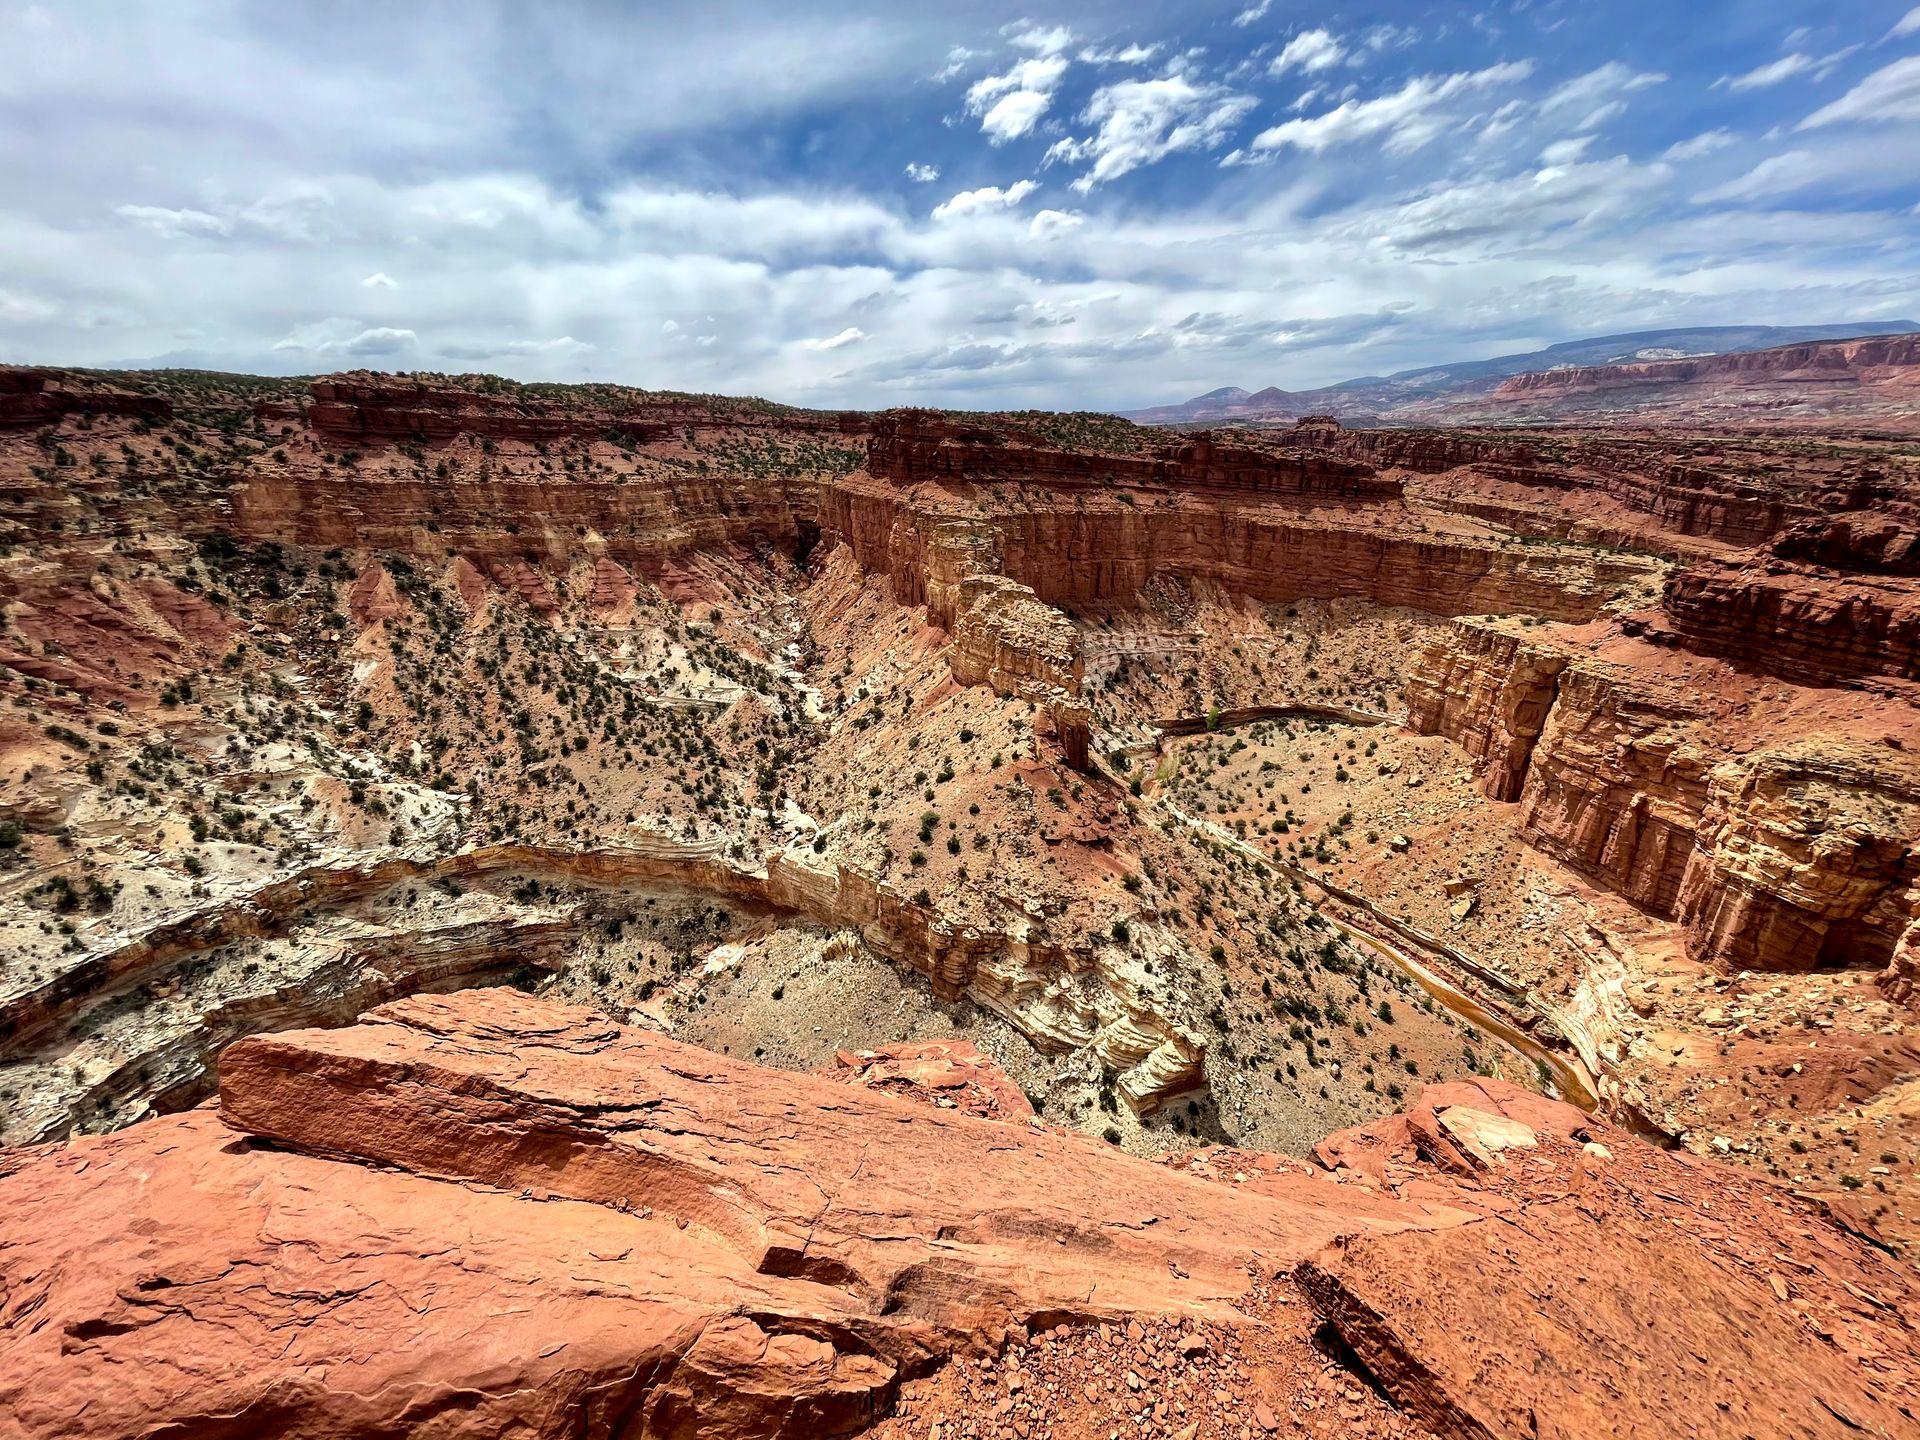 A curved gorge that resembles a S is surrounded by orange cliffs. This is the views at the Goosenecks Overlook.